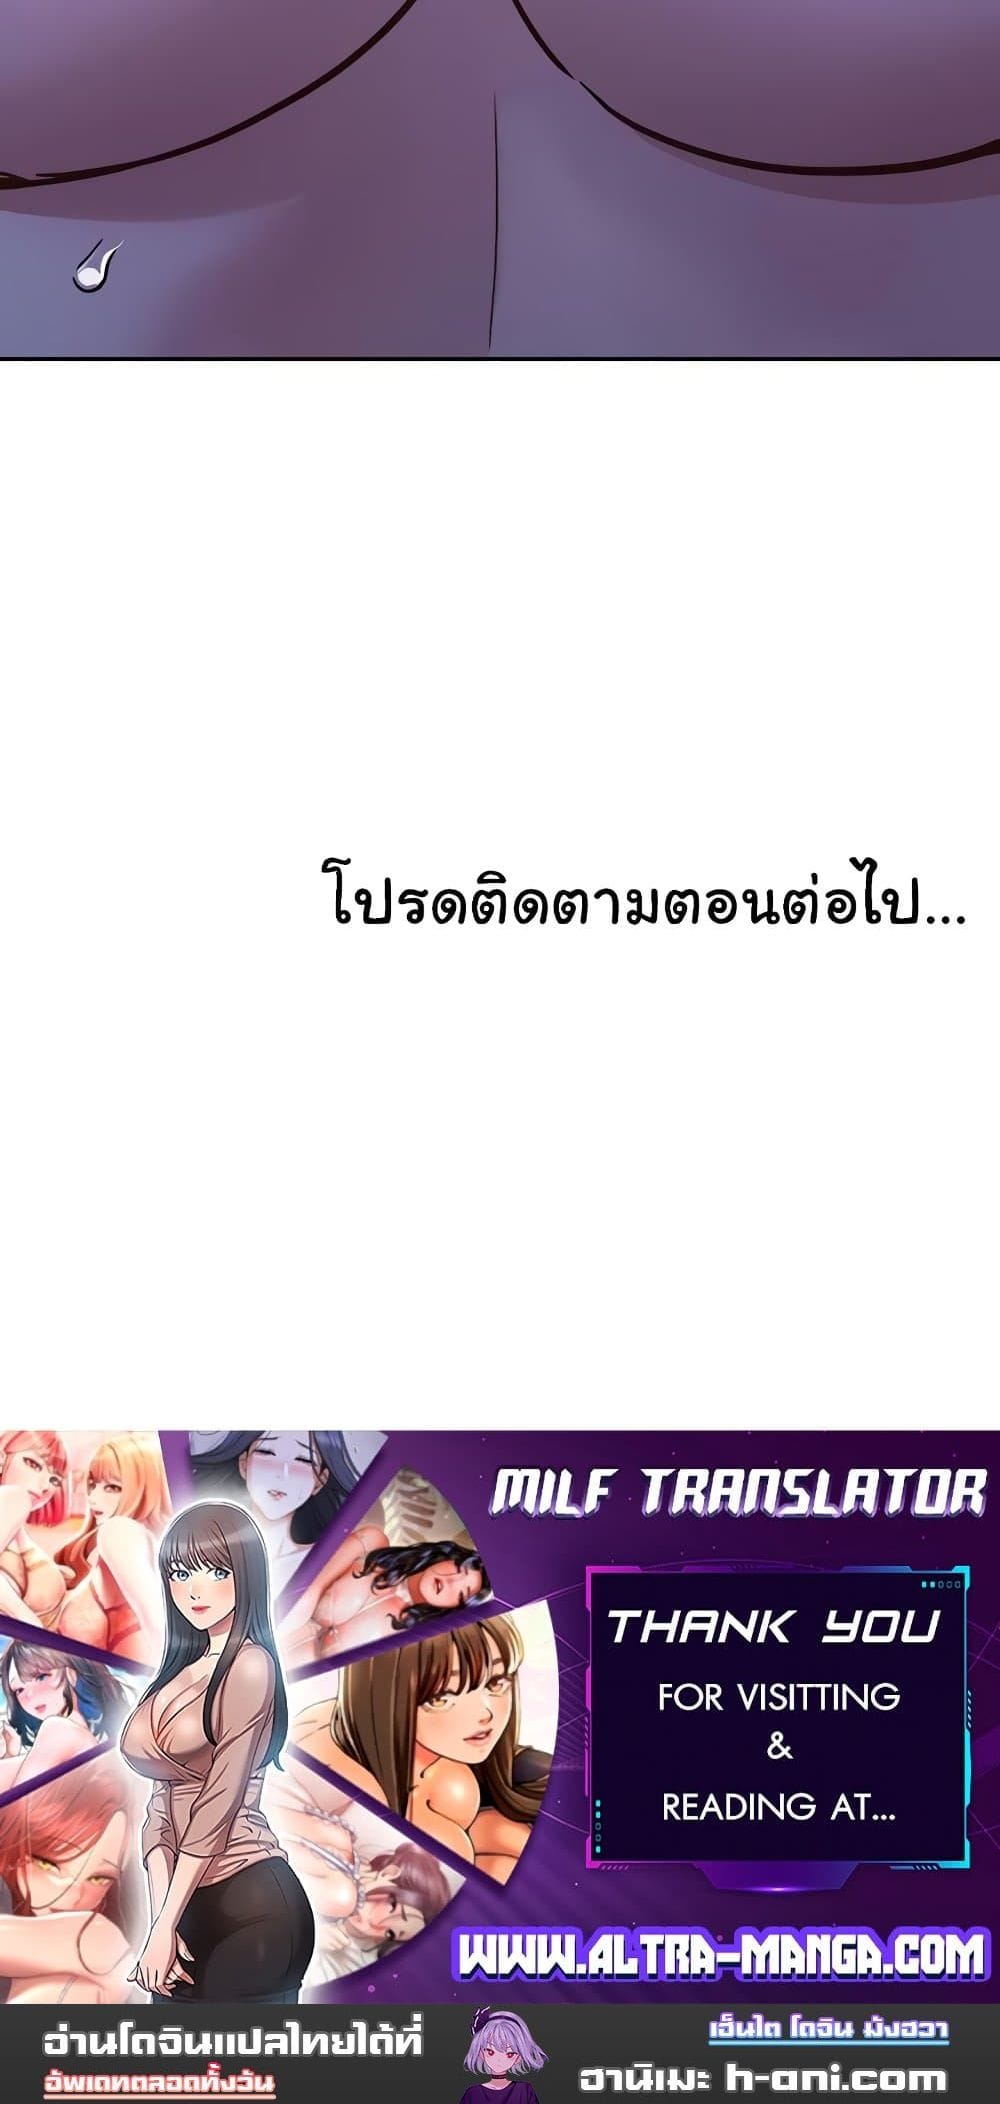 Let’s Hang Out from Today ตอนที่ 45 ภาพ 15